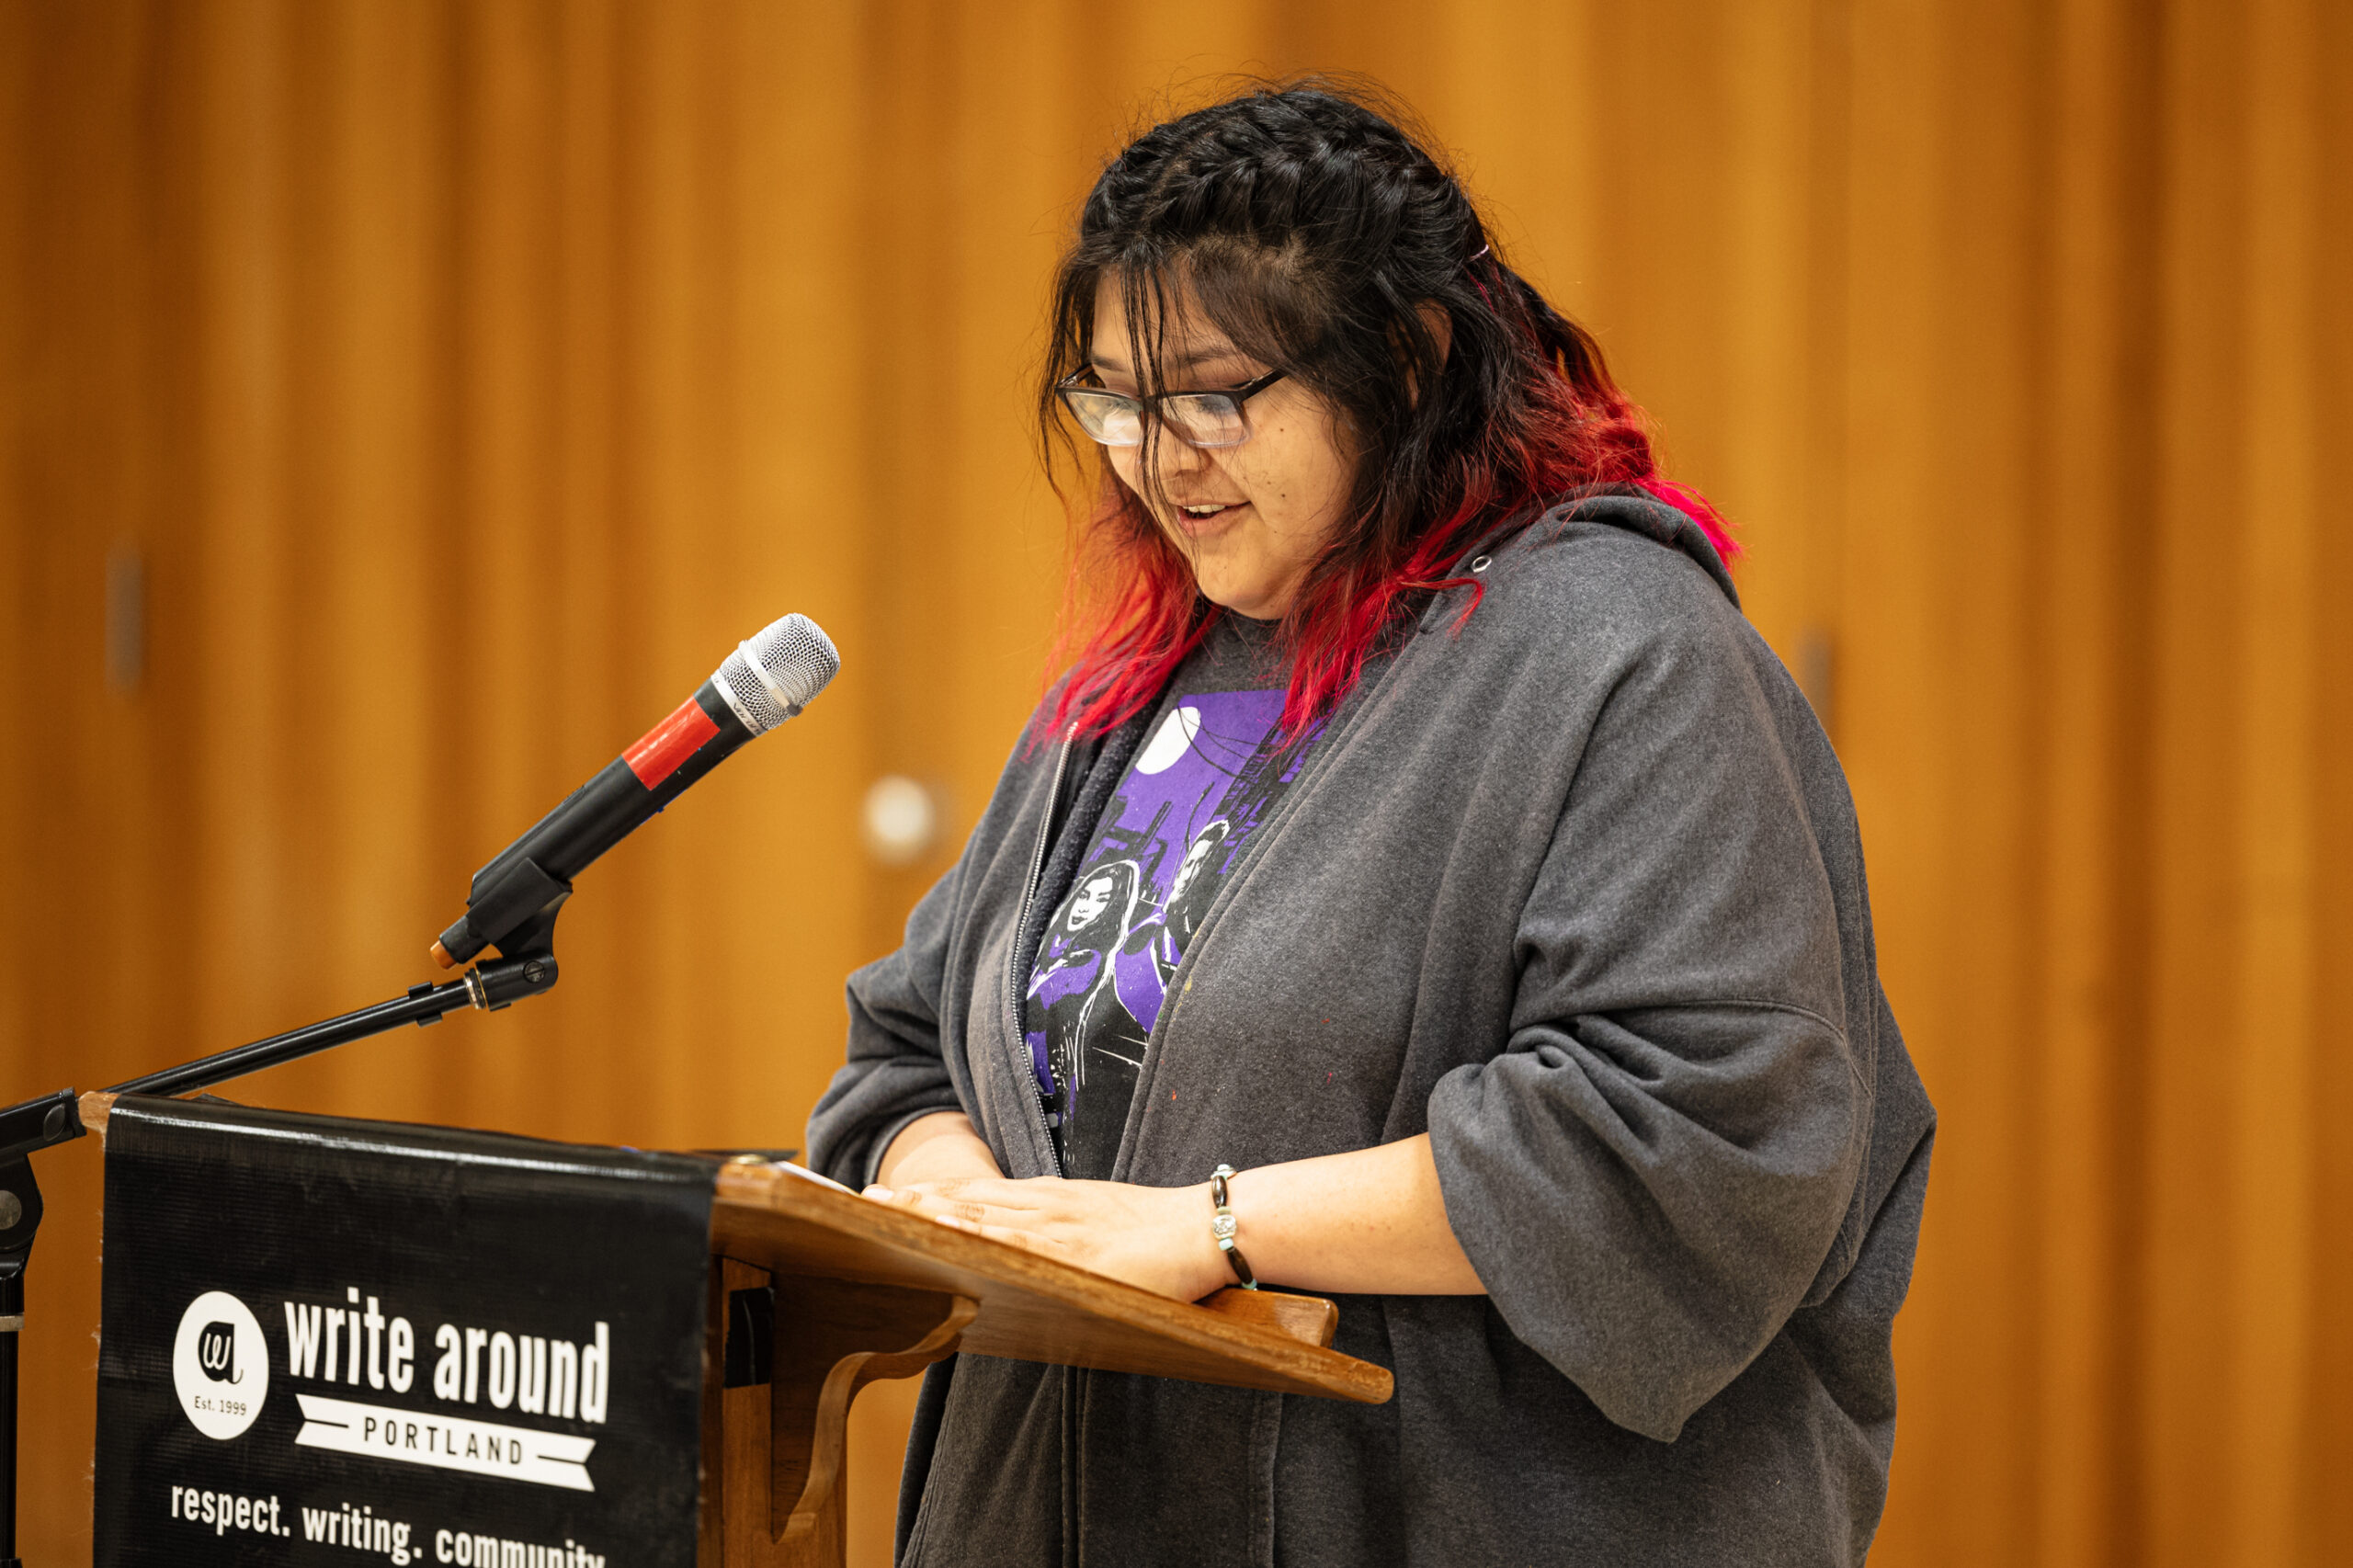 A woman of color in glasses stands in front of a microphone looking down. She smiles faintly.